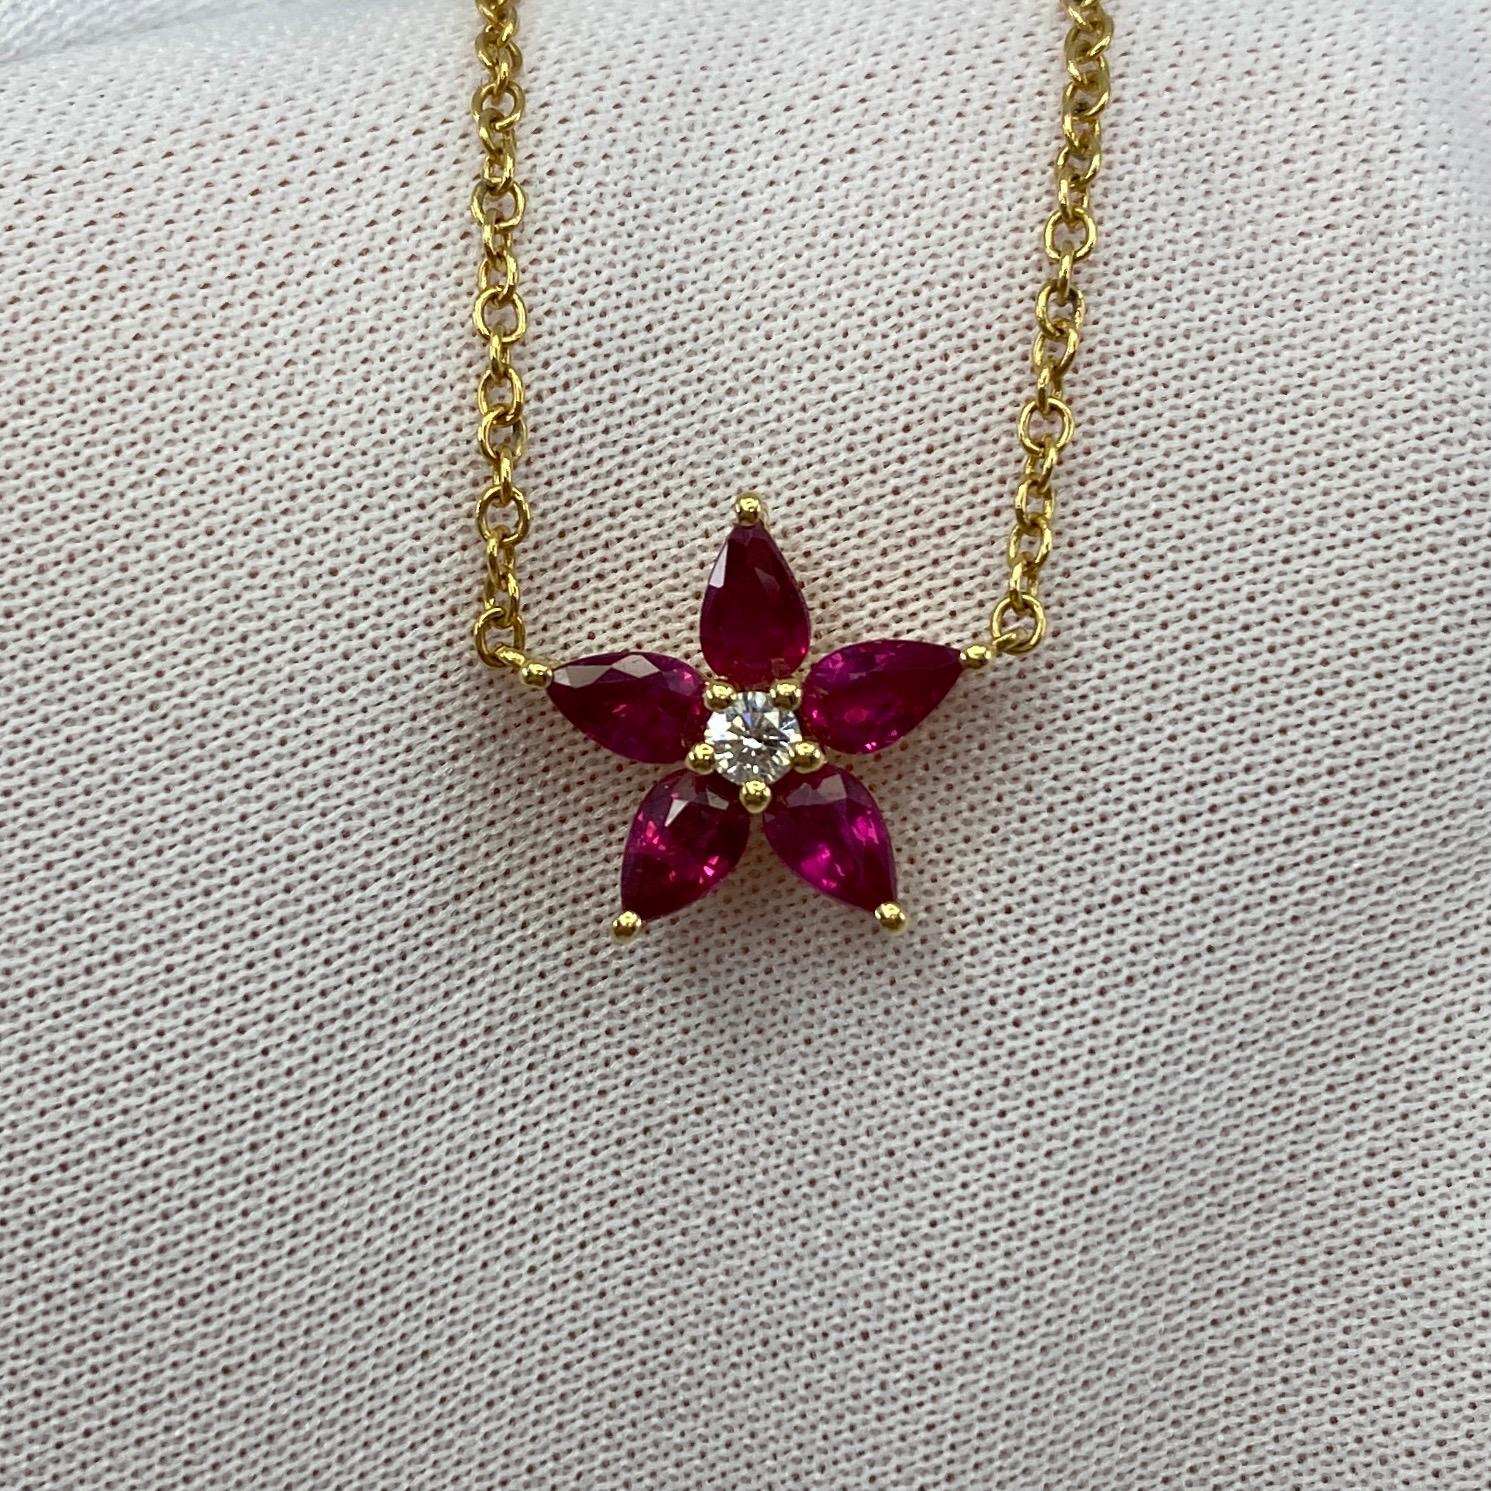 Fine Deep Red Ruby & Diamond 18k Yellow Gold Flower Necklace.

Stunning 1.50 total carat pear cut rubies with a fine deep red colour and excellent clarity. Radiating around a 2.5mm white diamond. G/H colour Si1/2 clarity.
All set in a fine 18k